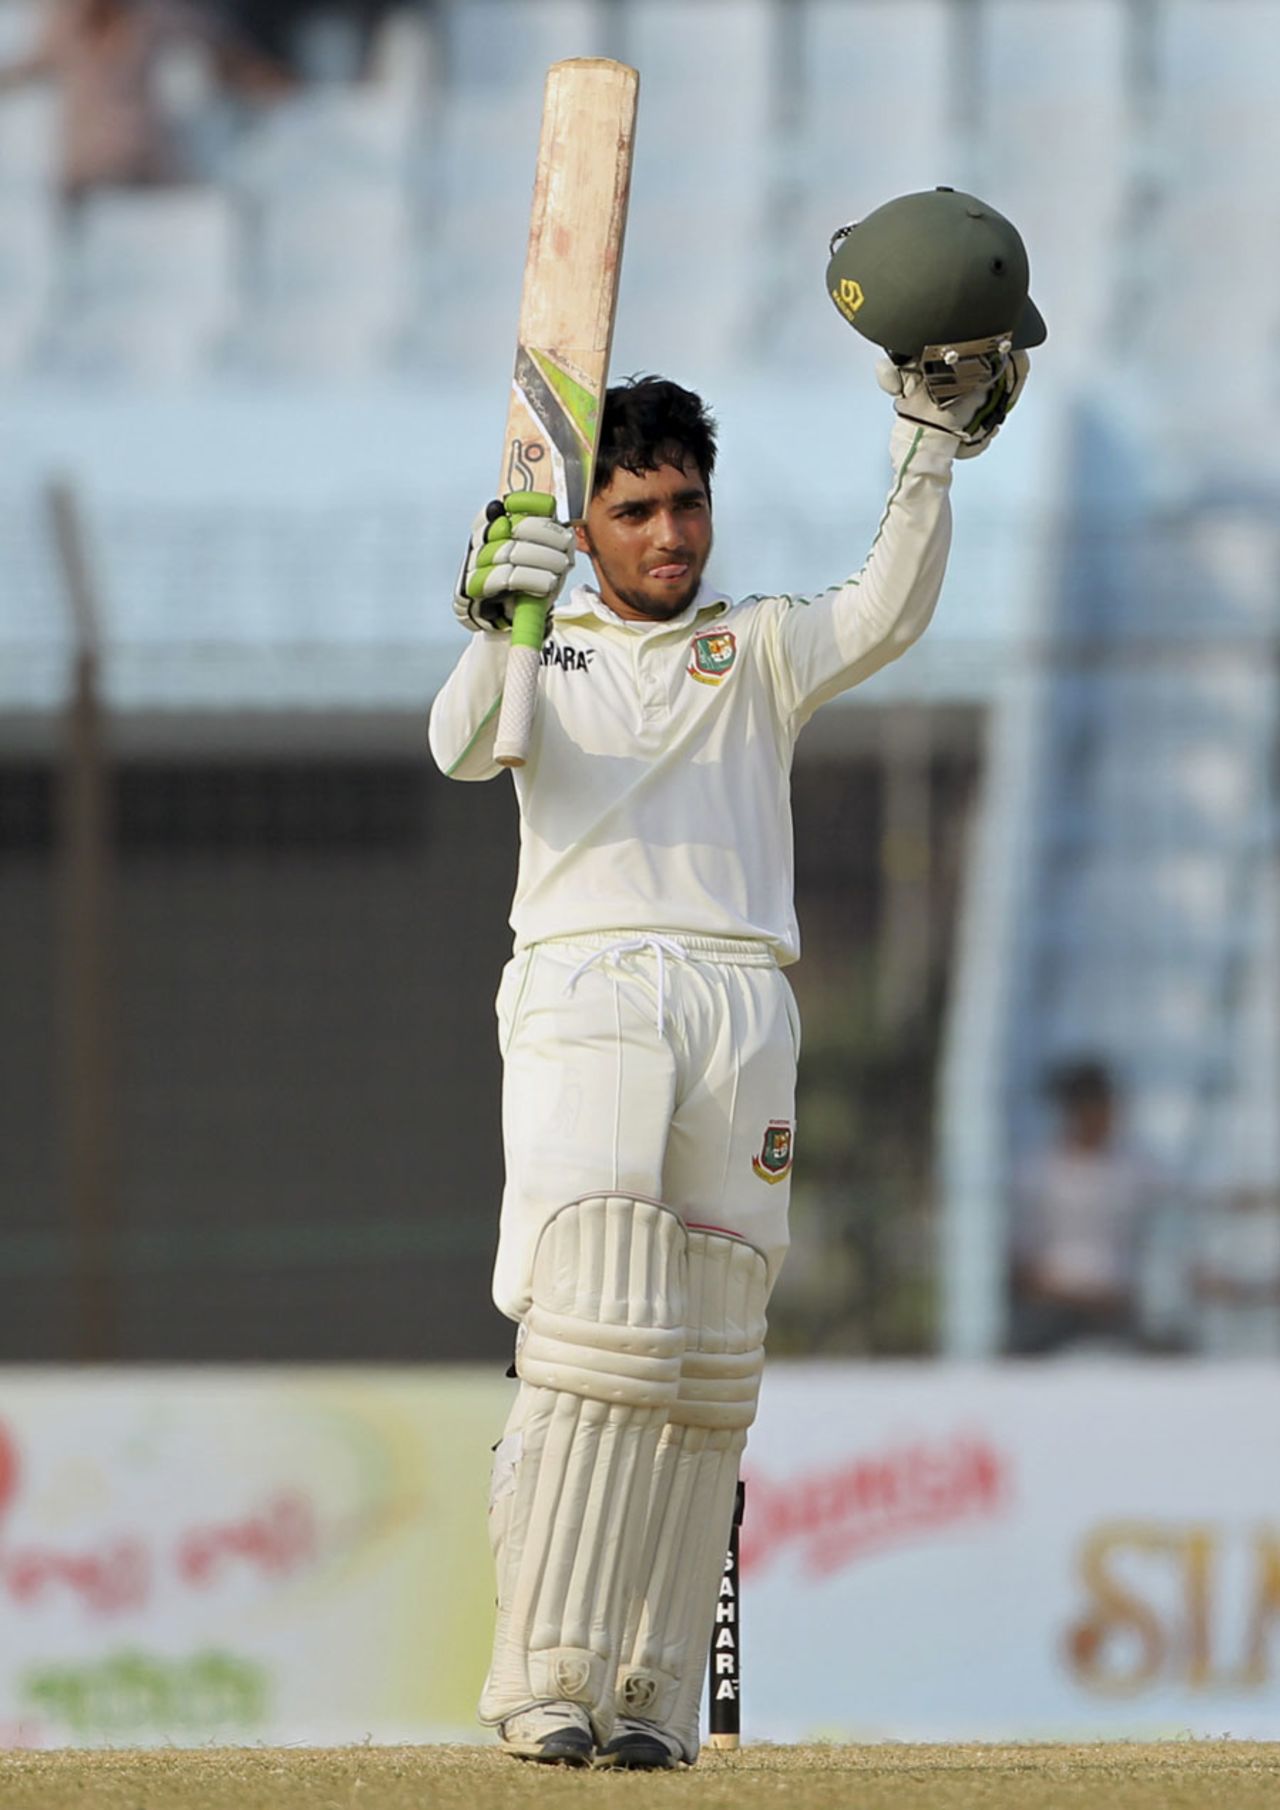 Mominul Haque raises his bat after reaching his third Test hundred, Bangladesh v Sri Lanka, 2nd Test, Chittagong, 5th day, February 8, 2014